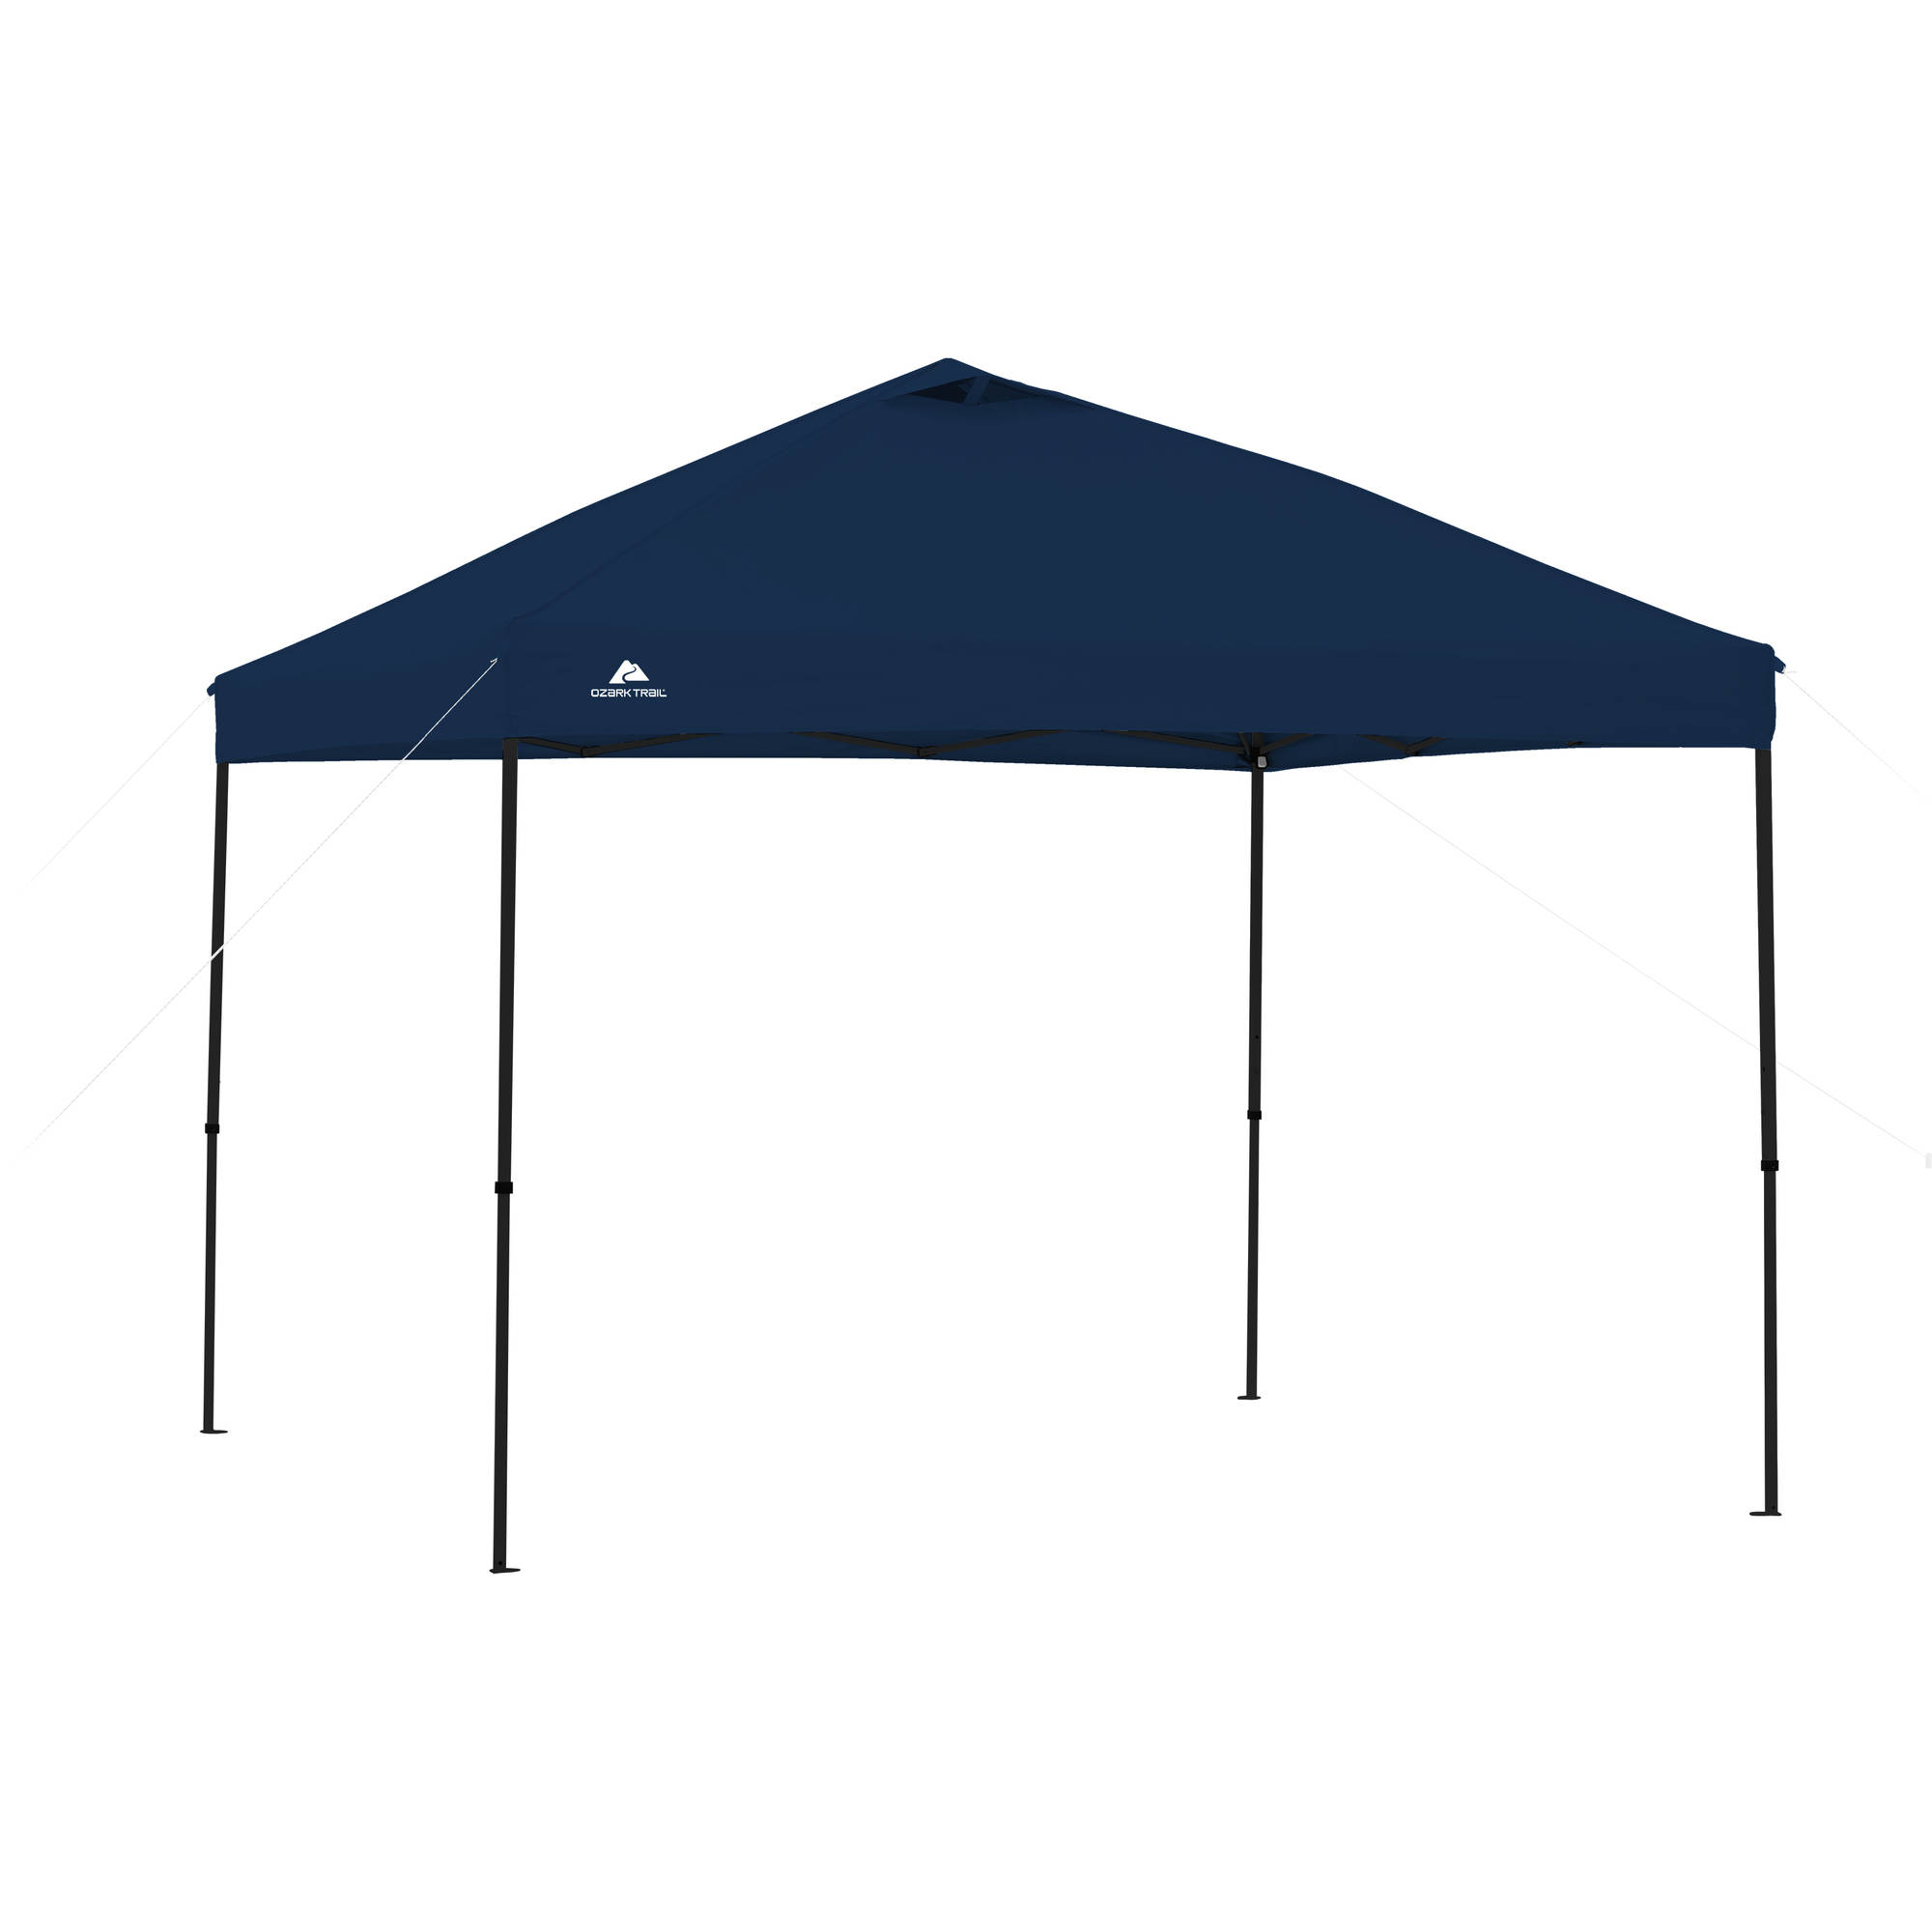 Ozark Trail 10' x 10' Navy Blue Instant Outdoor Canopy - image 1 of 6